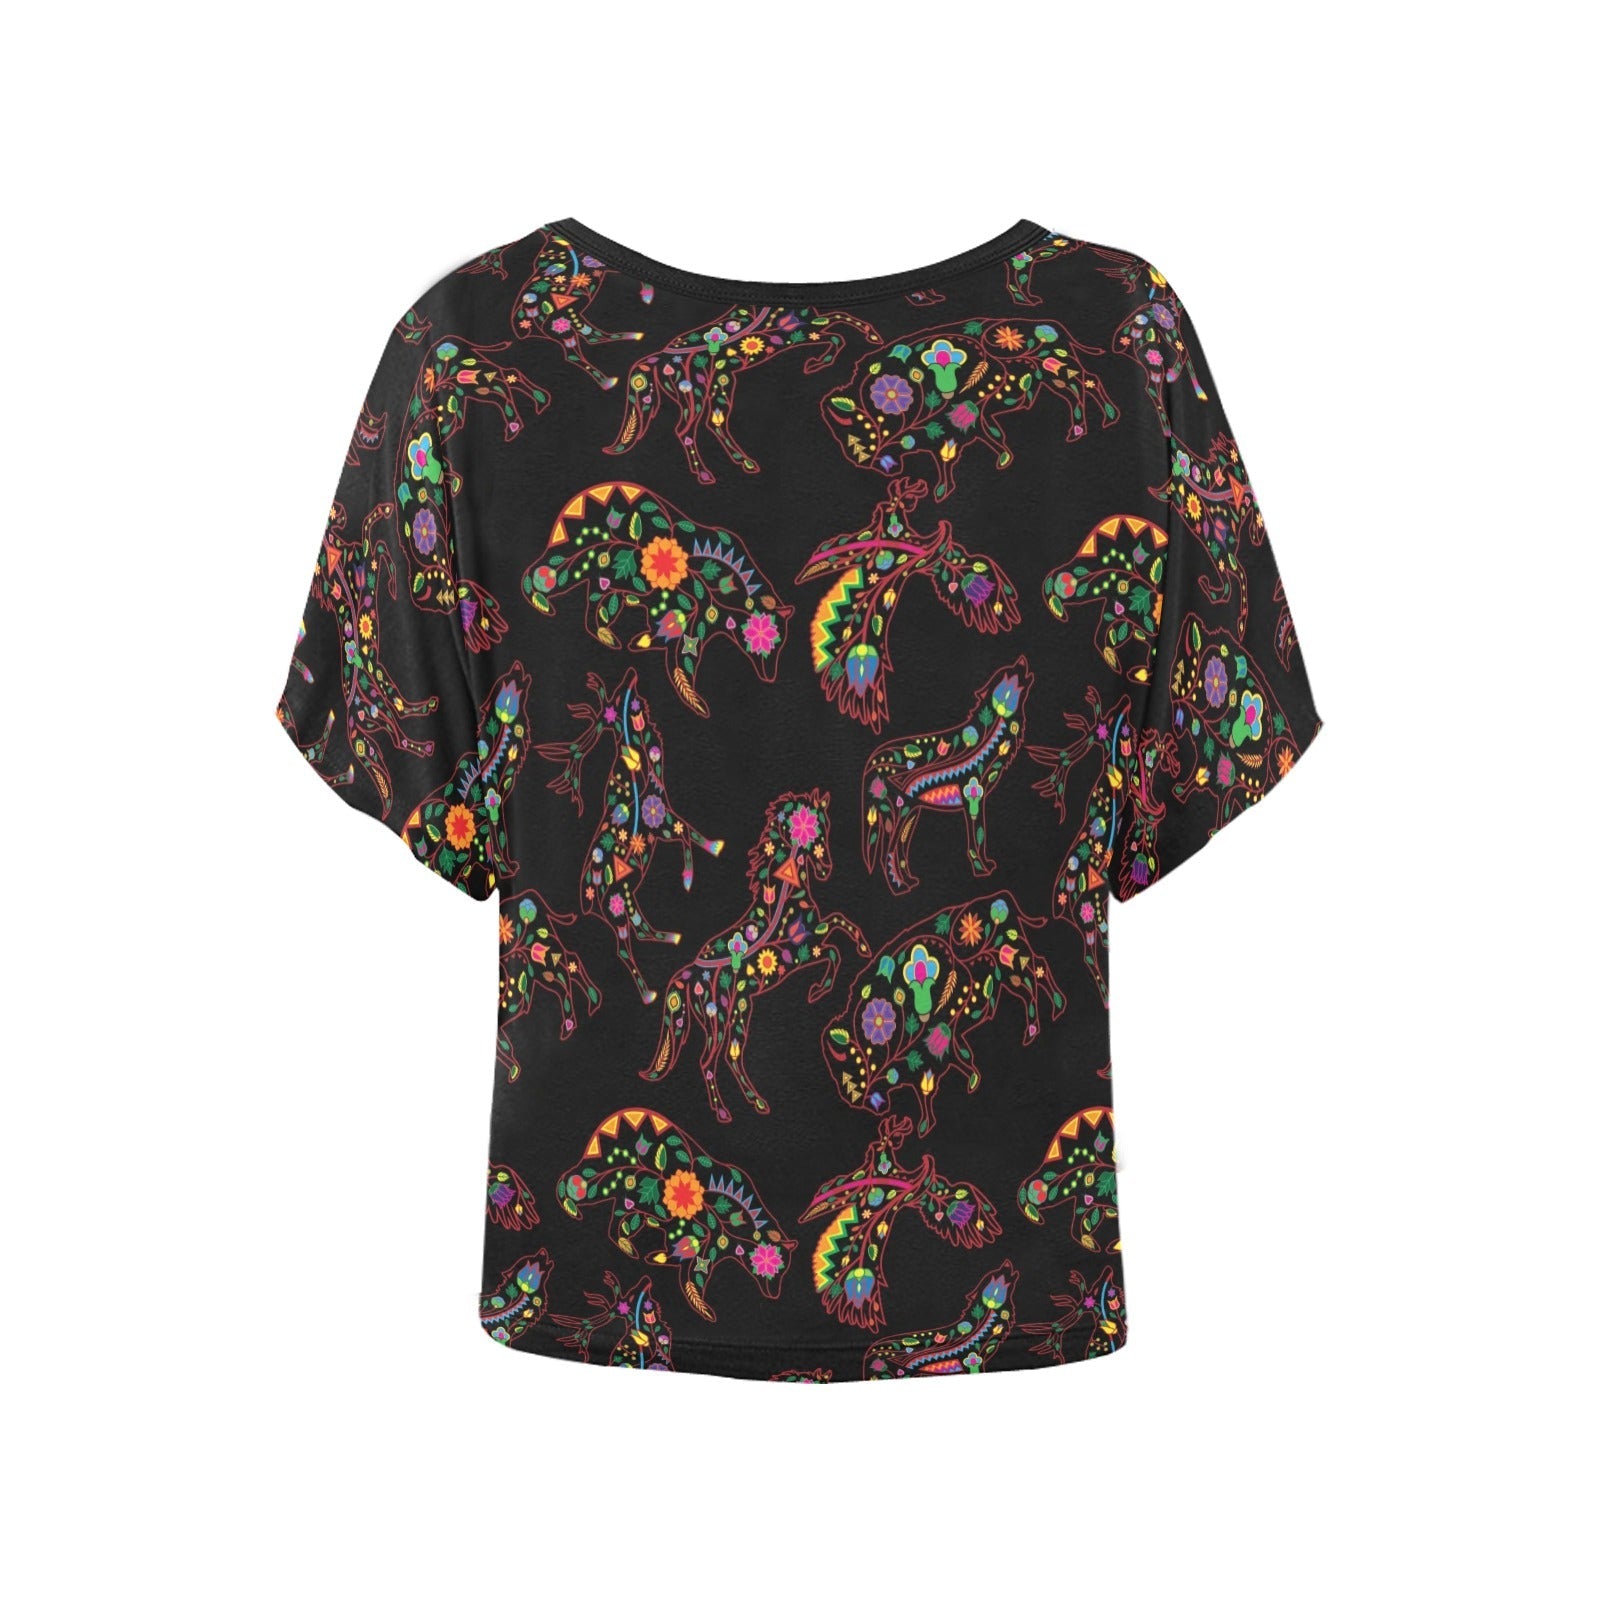 Neon Floral Animals Women's Batwing-Sleeved Blouse T shirt (Model T44) Women's Batwing-Sleeved Blouse T shirt (T44) e-joyer 